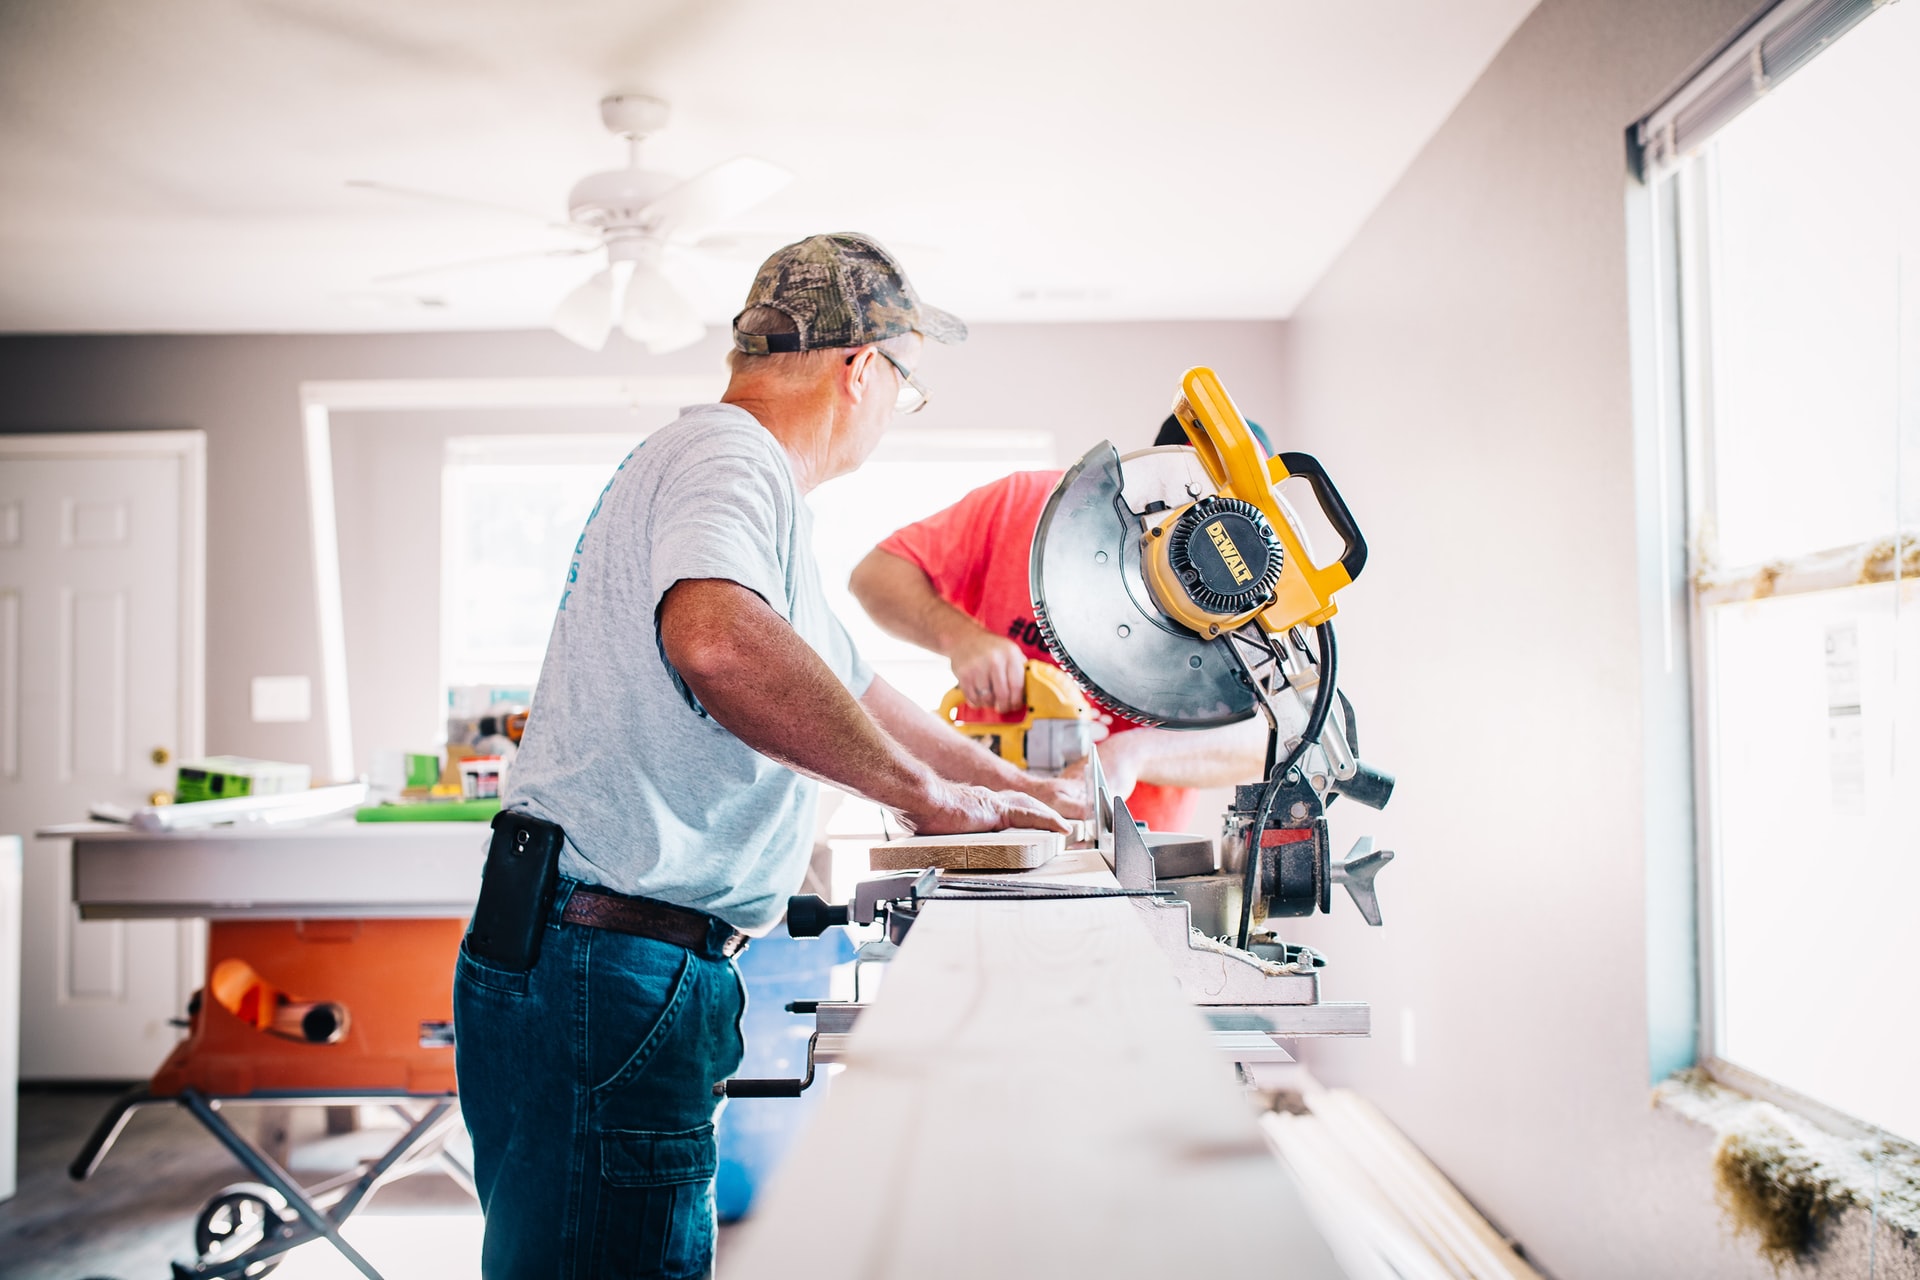 How do I start a handyman business from home?